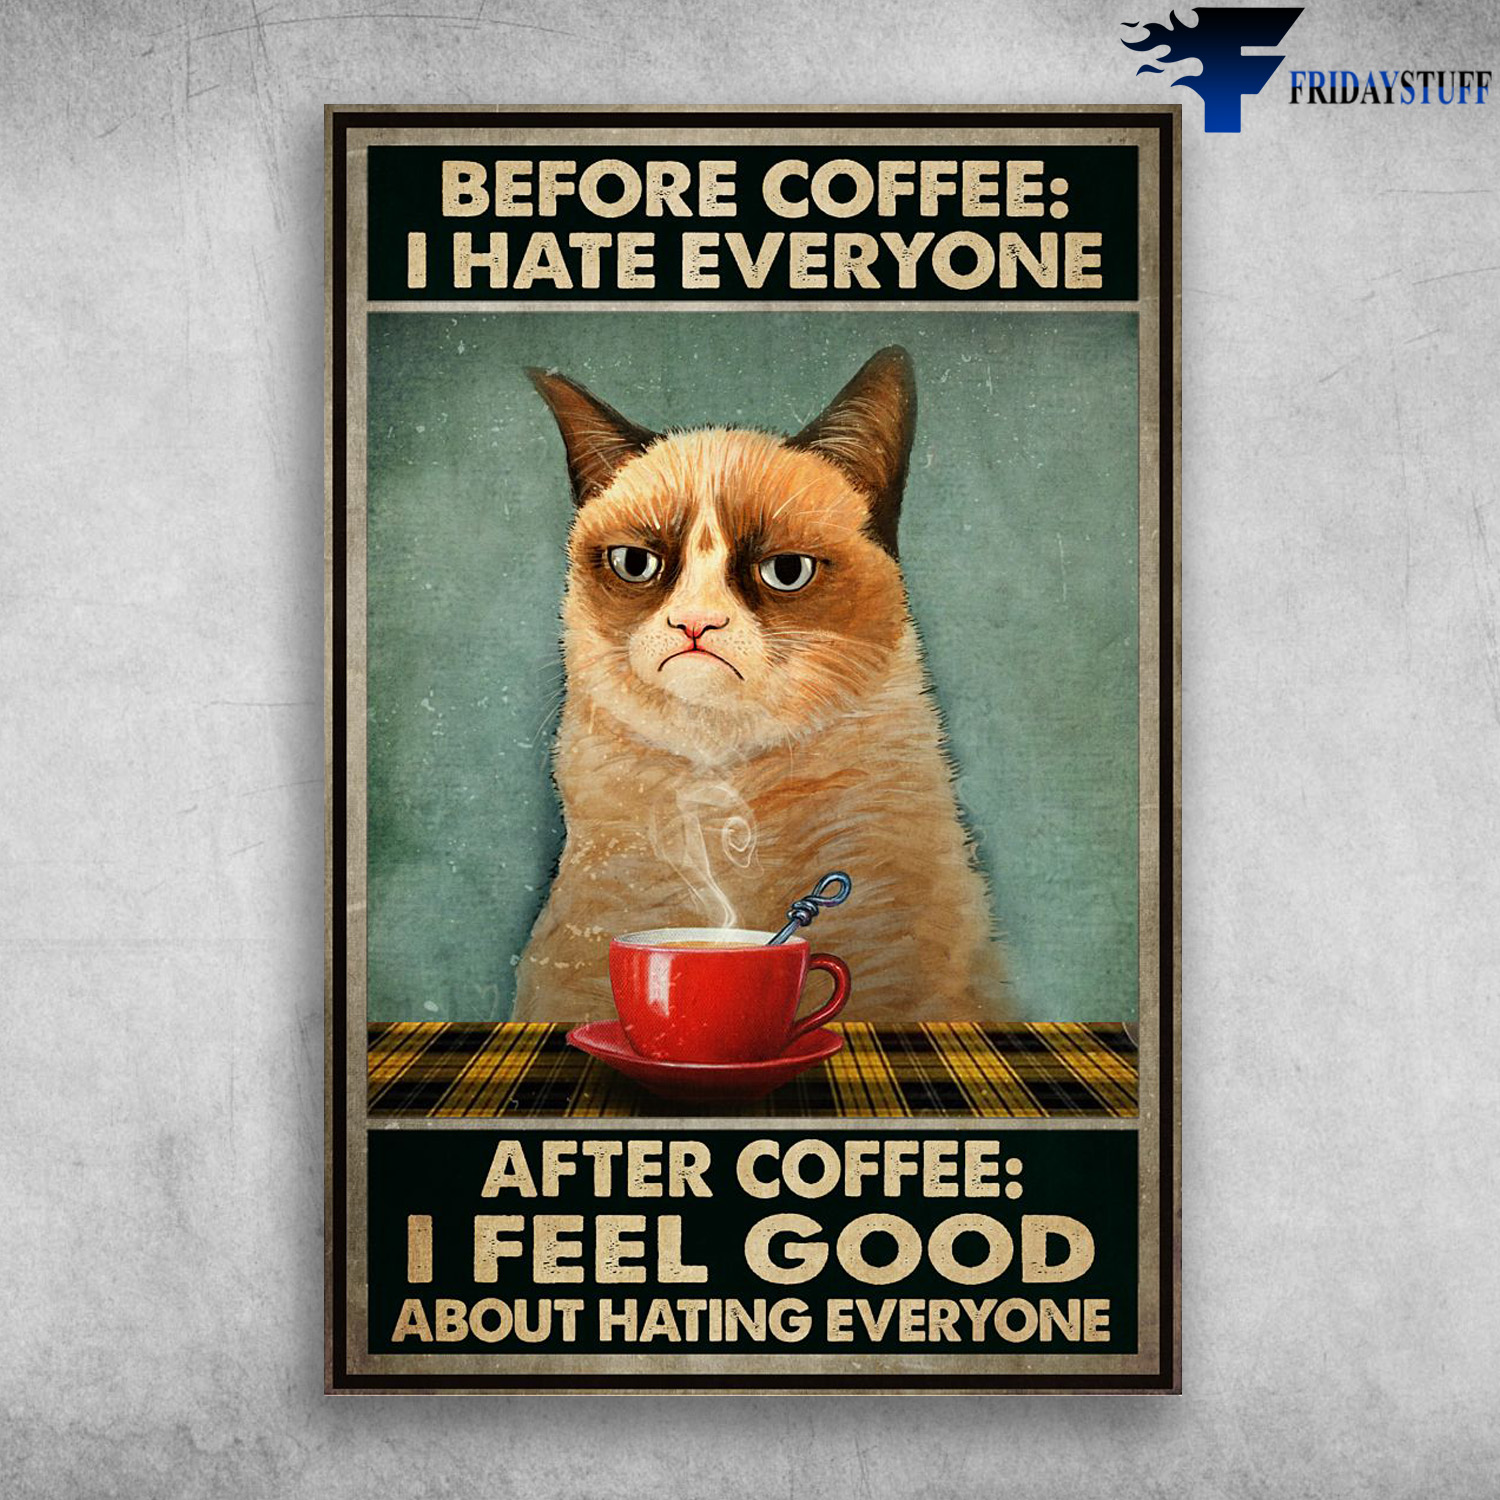 Cat And Coffee - Before Coffee, I Hate Everyone, After Coffee, I Feel Good About Hating Everyone